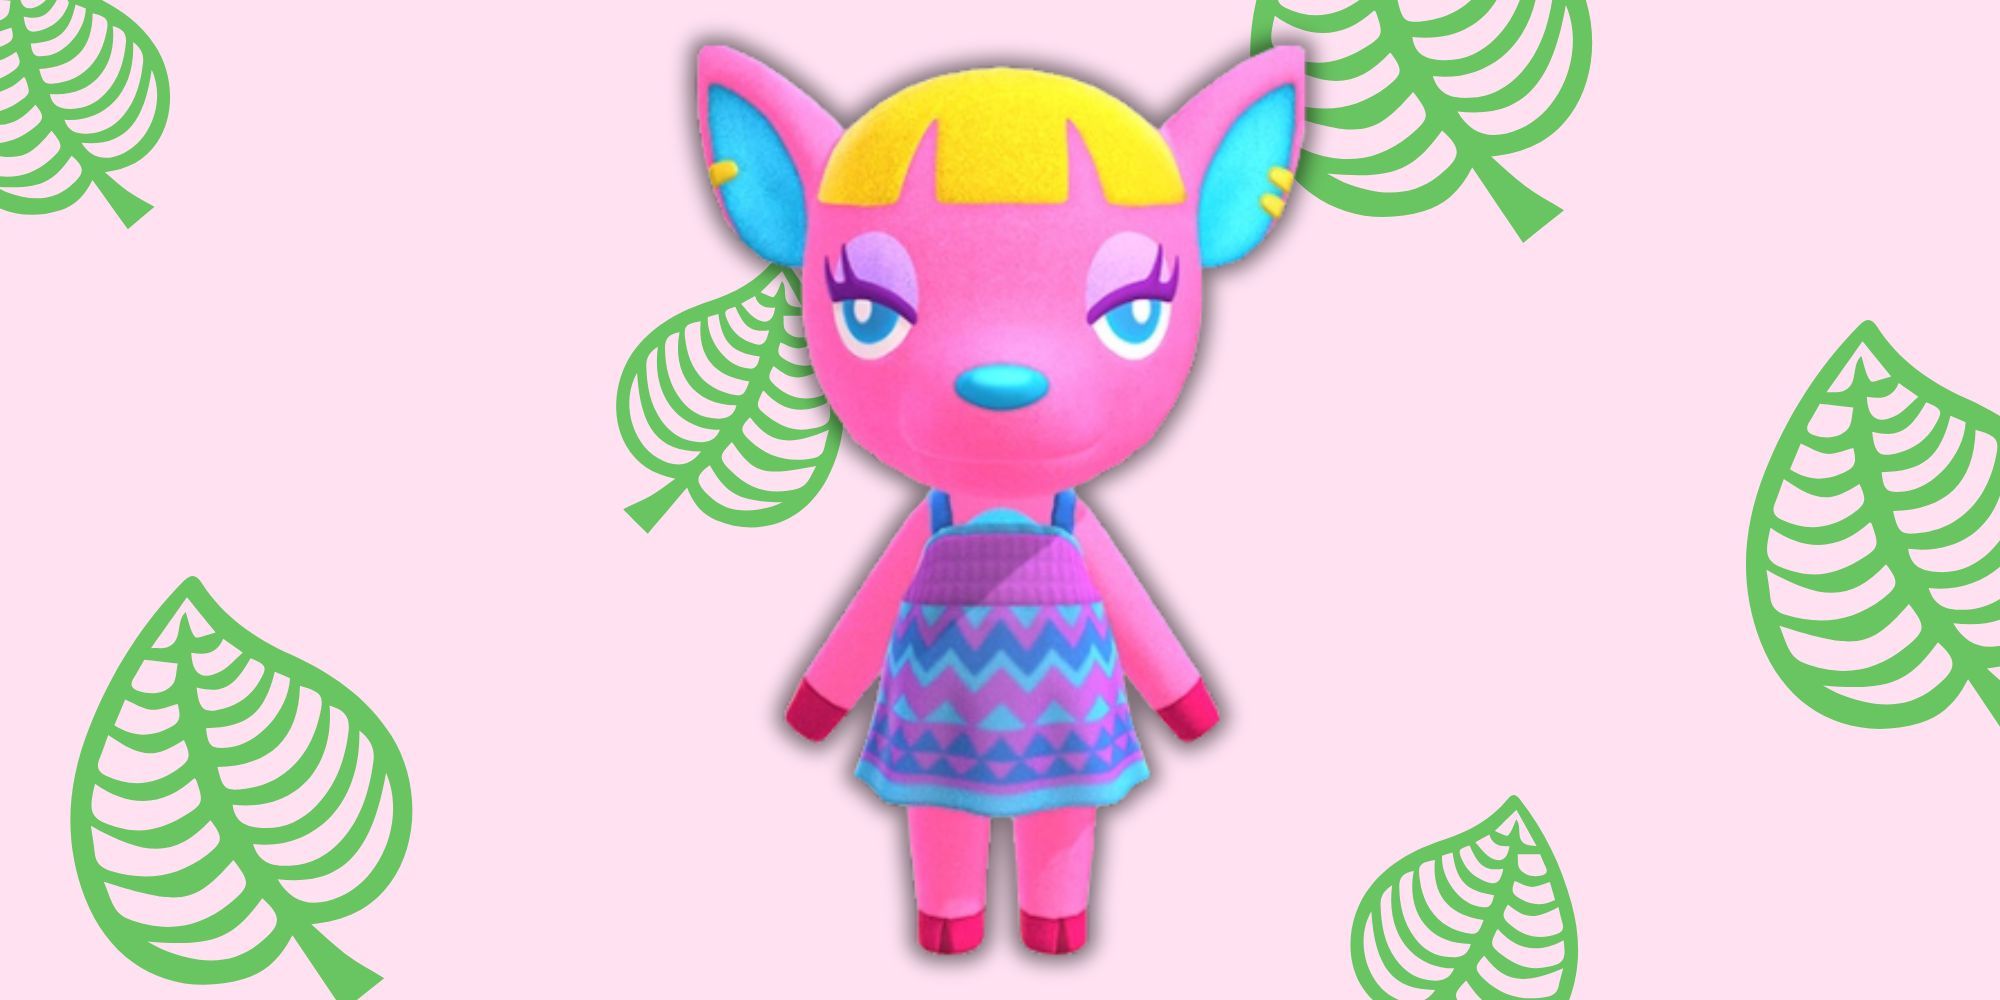 Fuchsia from Animal Crossing in front of leaf-patterned backdrop